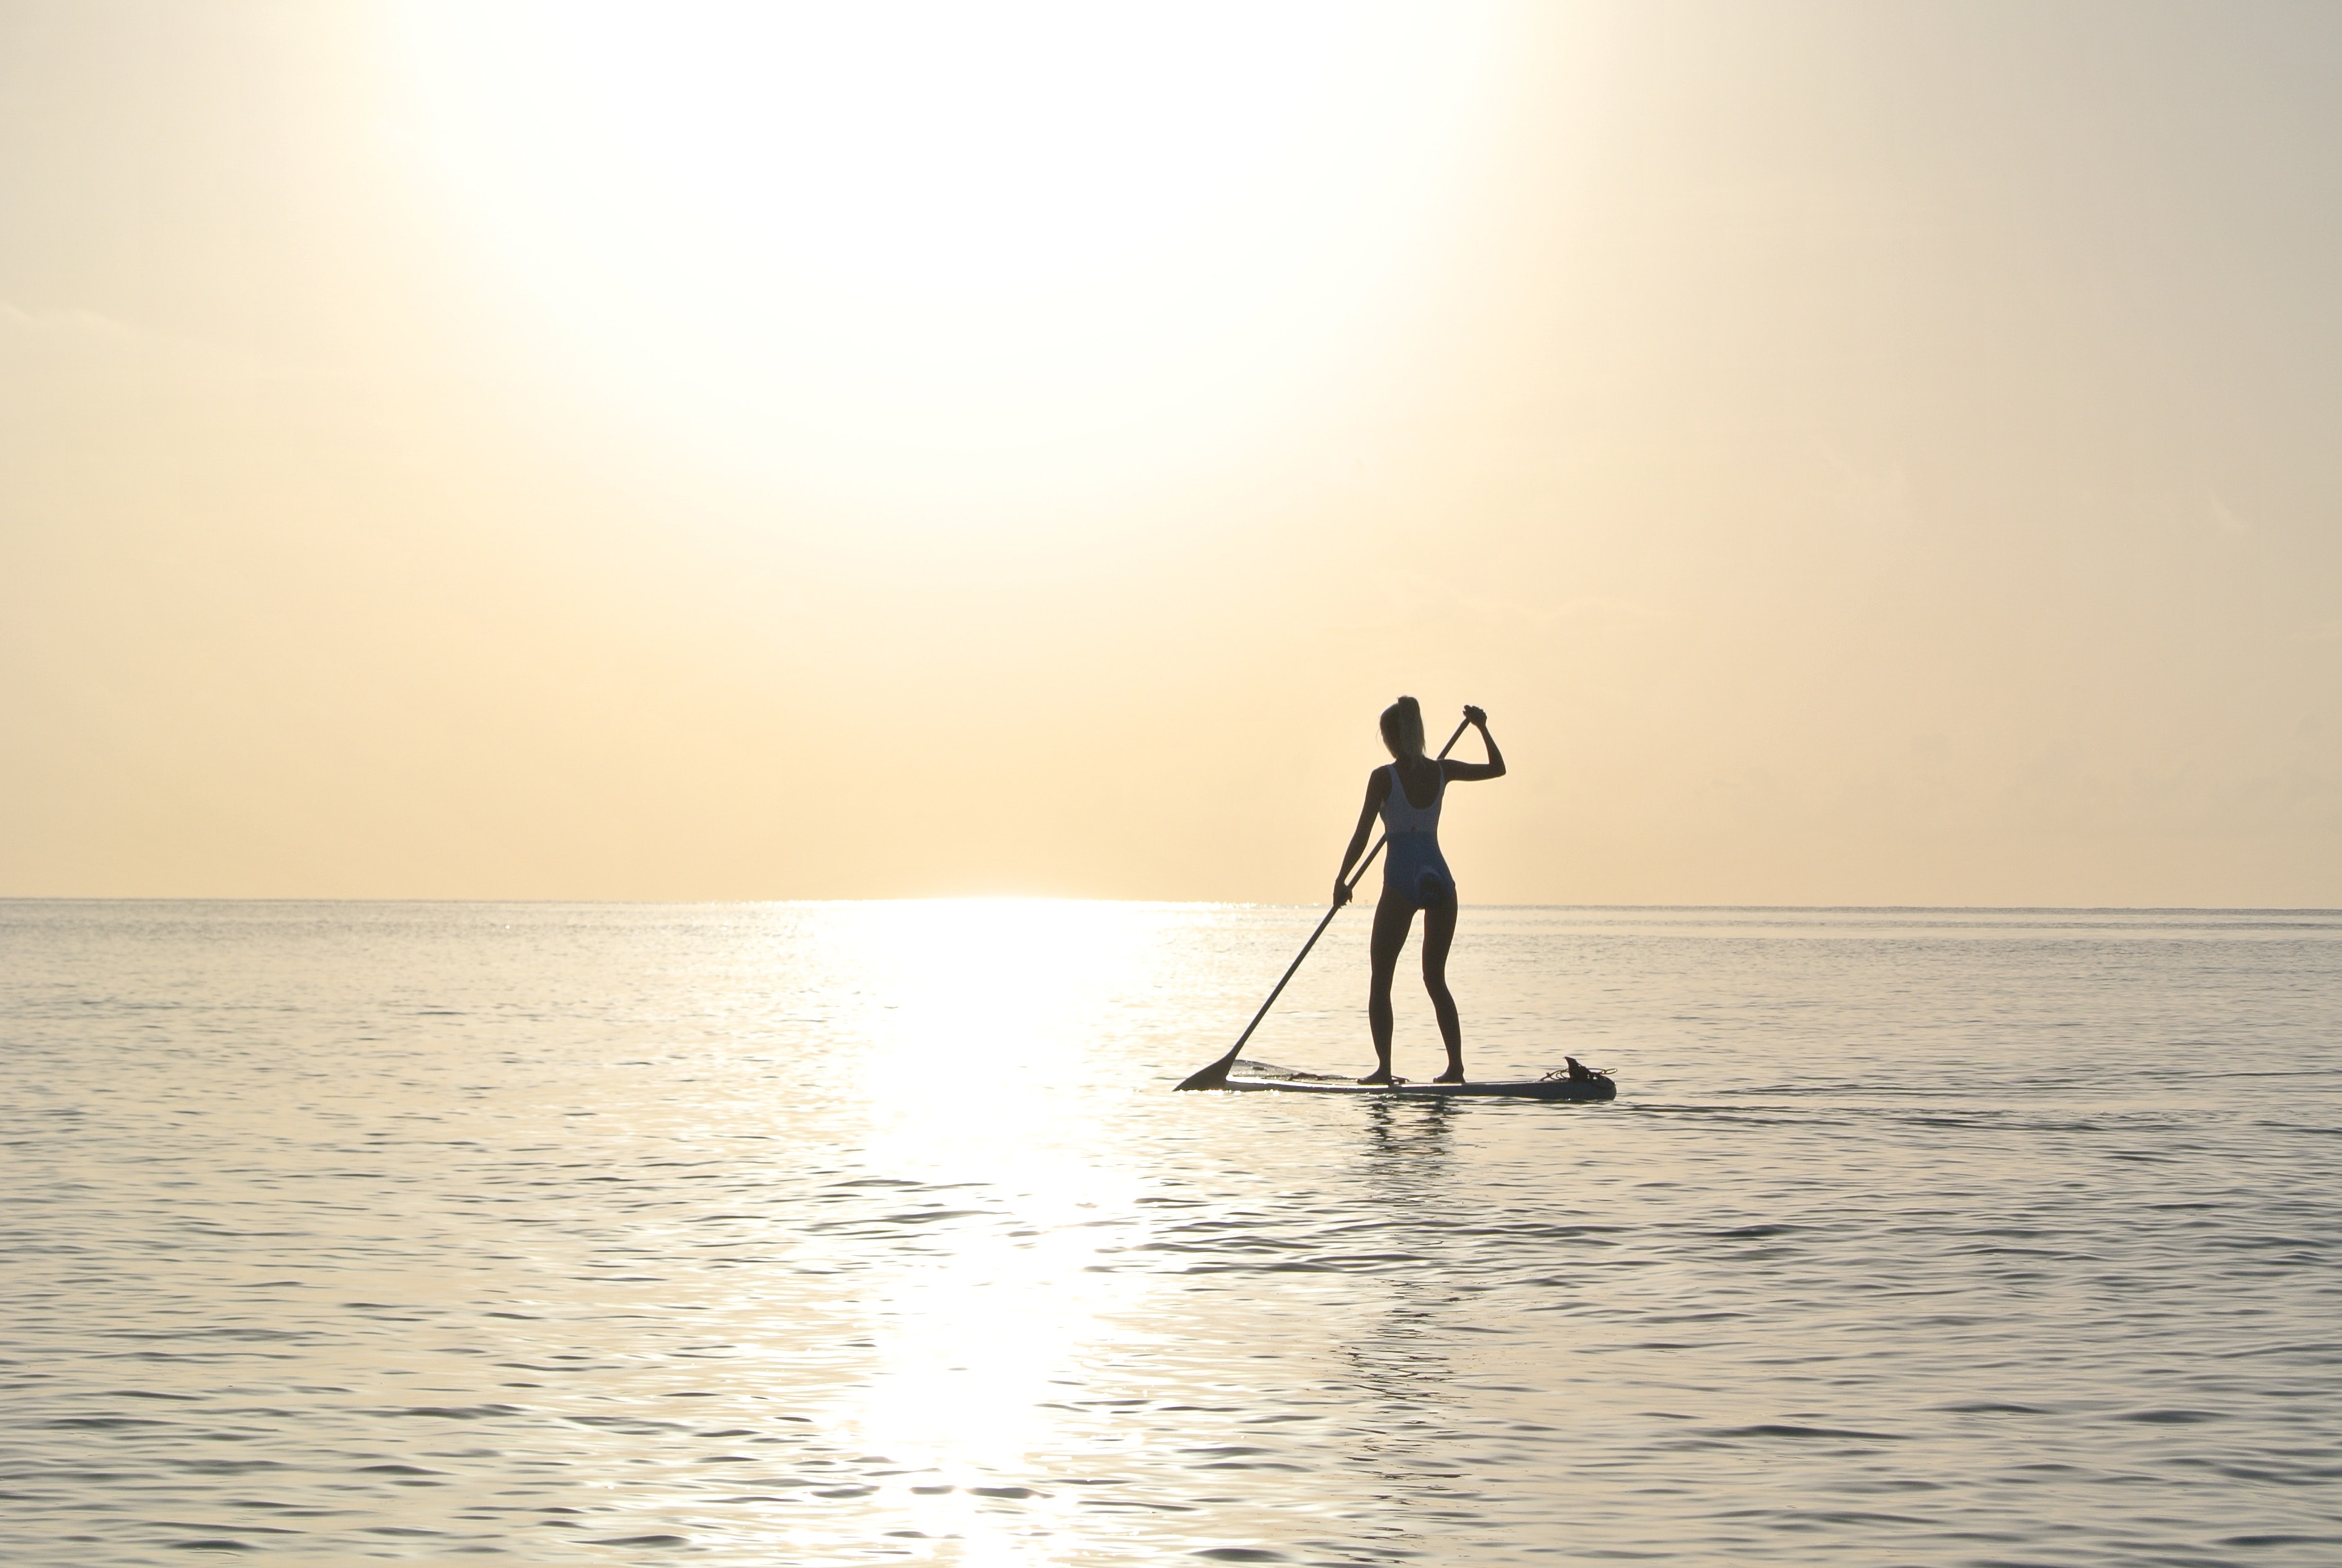 Woman standing on paddleboard on body of water photo